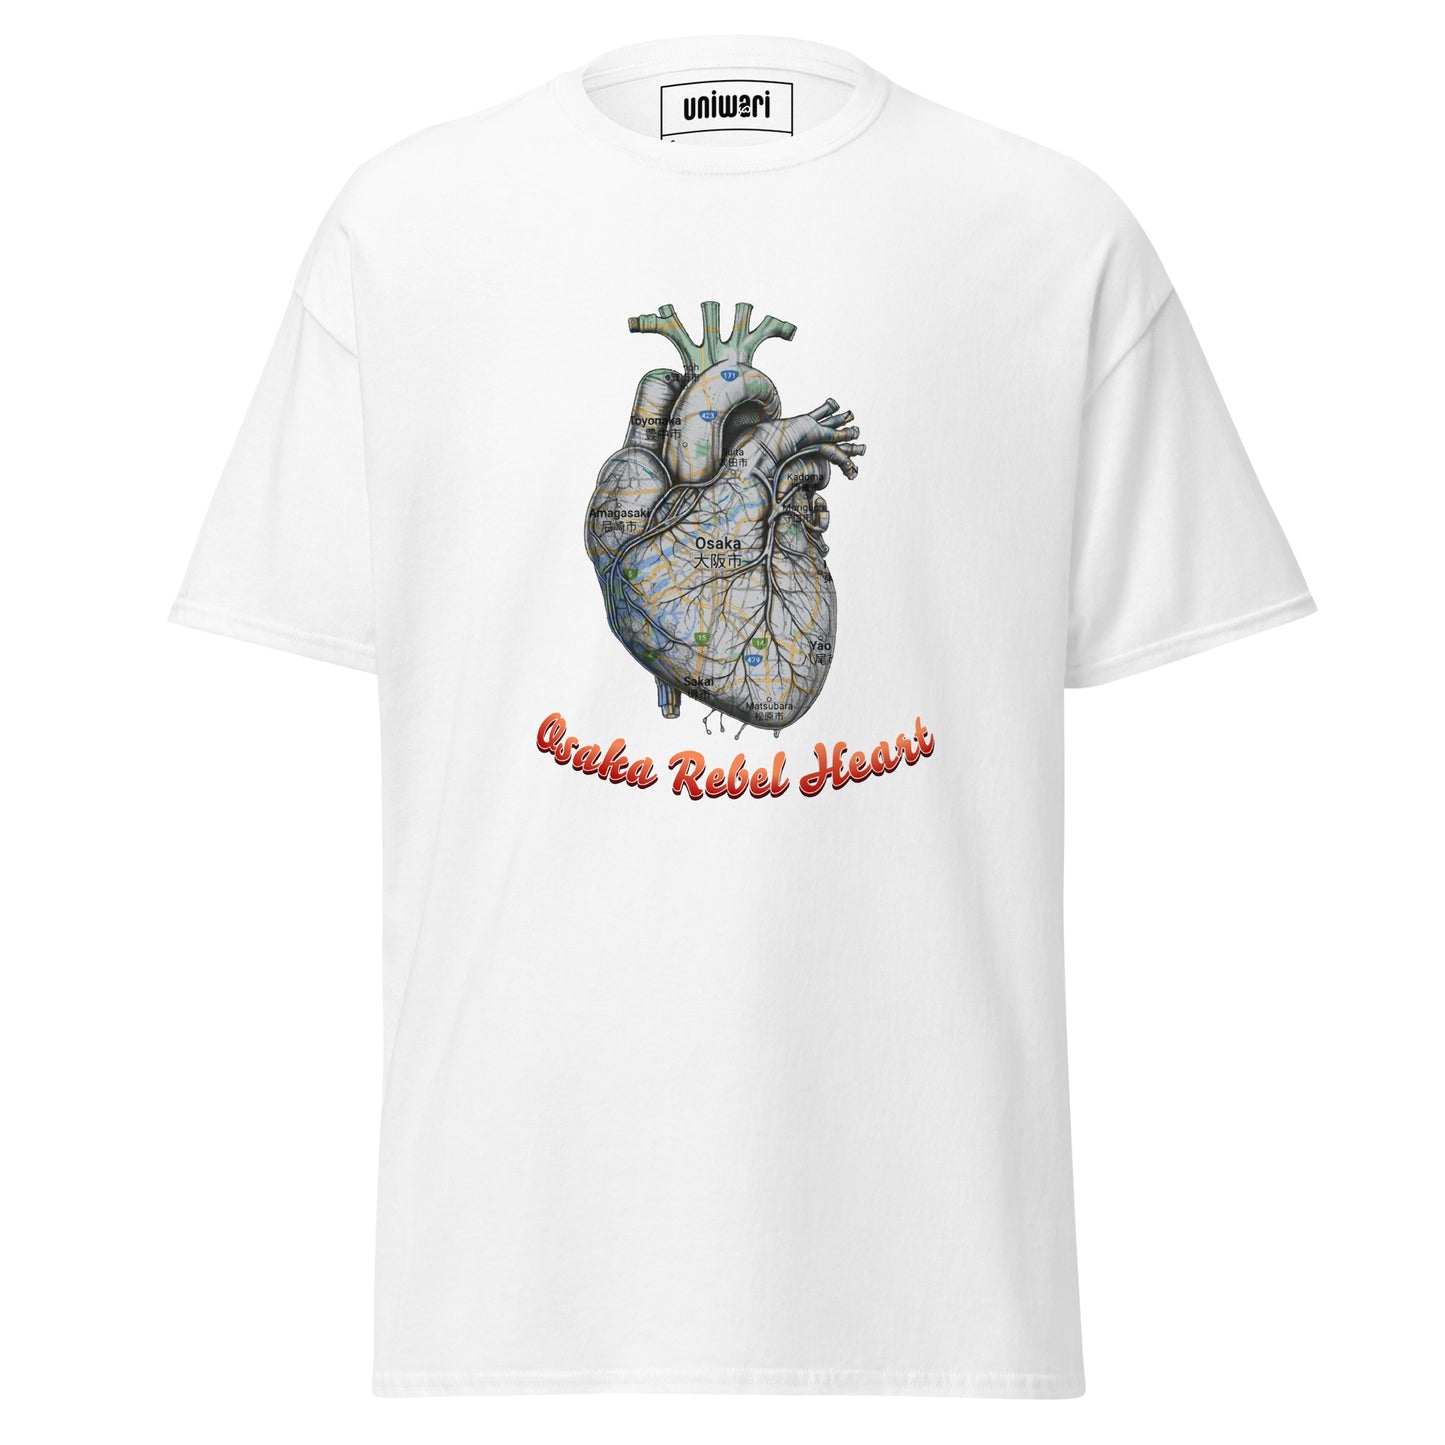 White High Quality Tee - Front Design with a Heart Shaped Map of Osaka and a Phrase "Osaka Rebel Heart" print